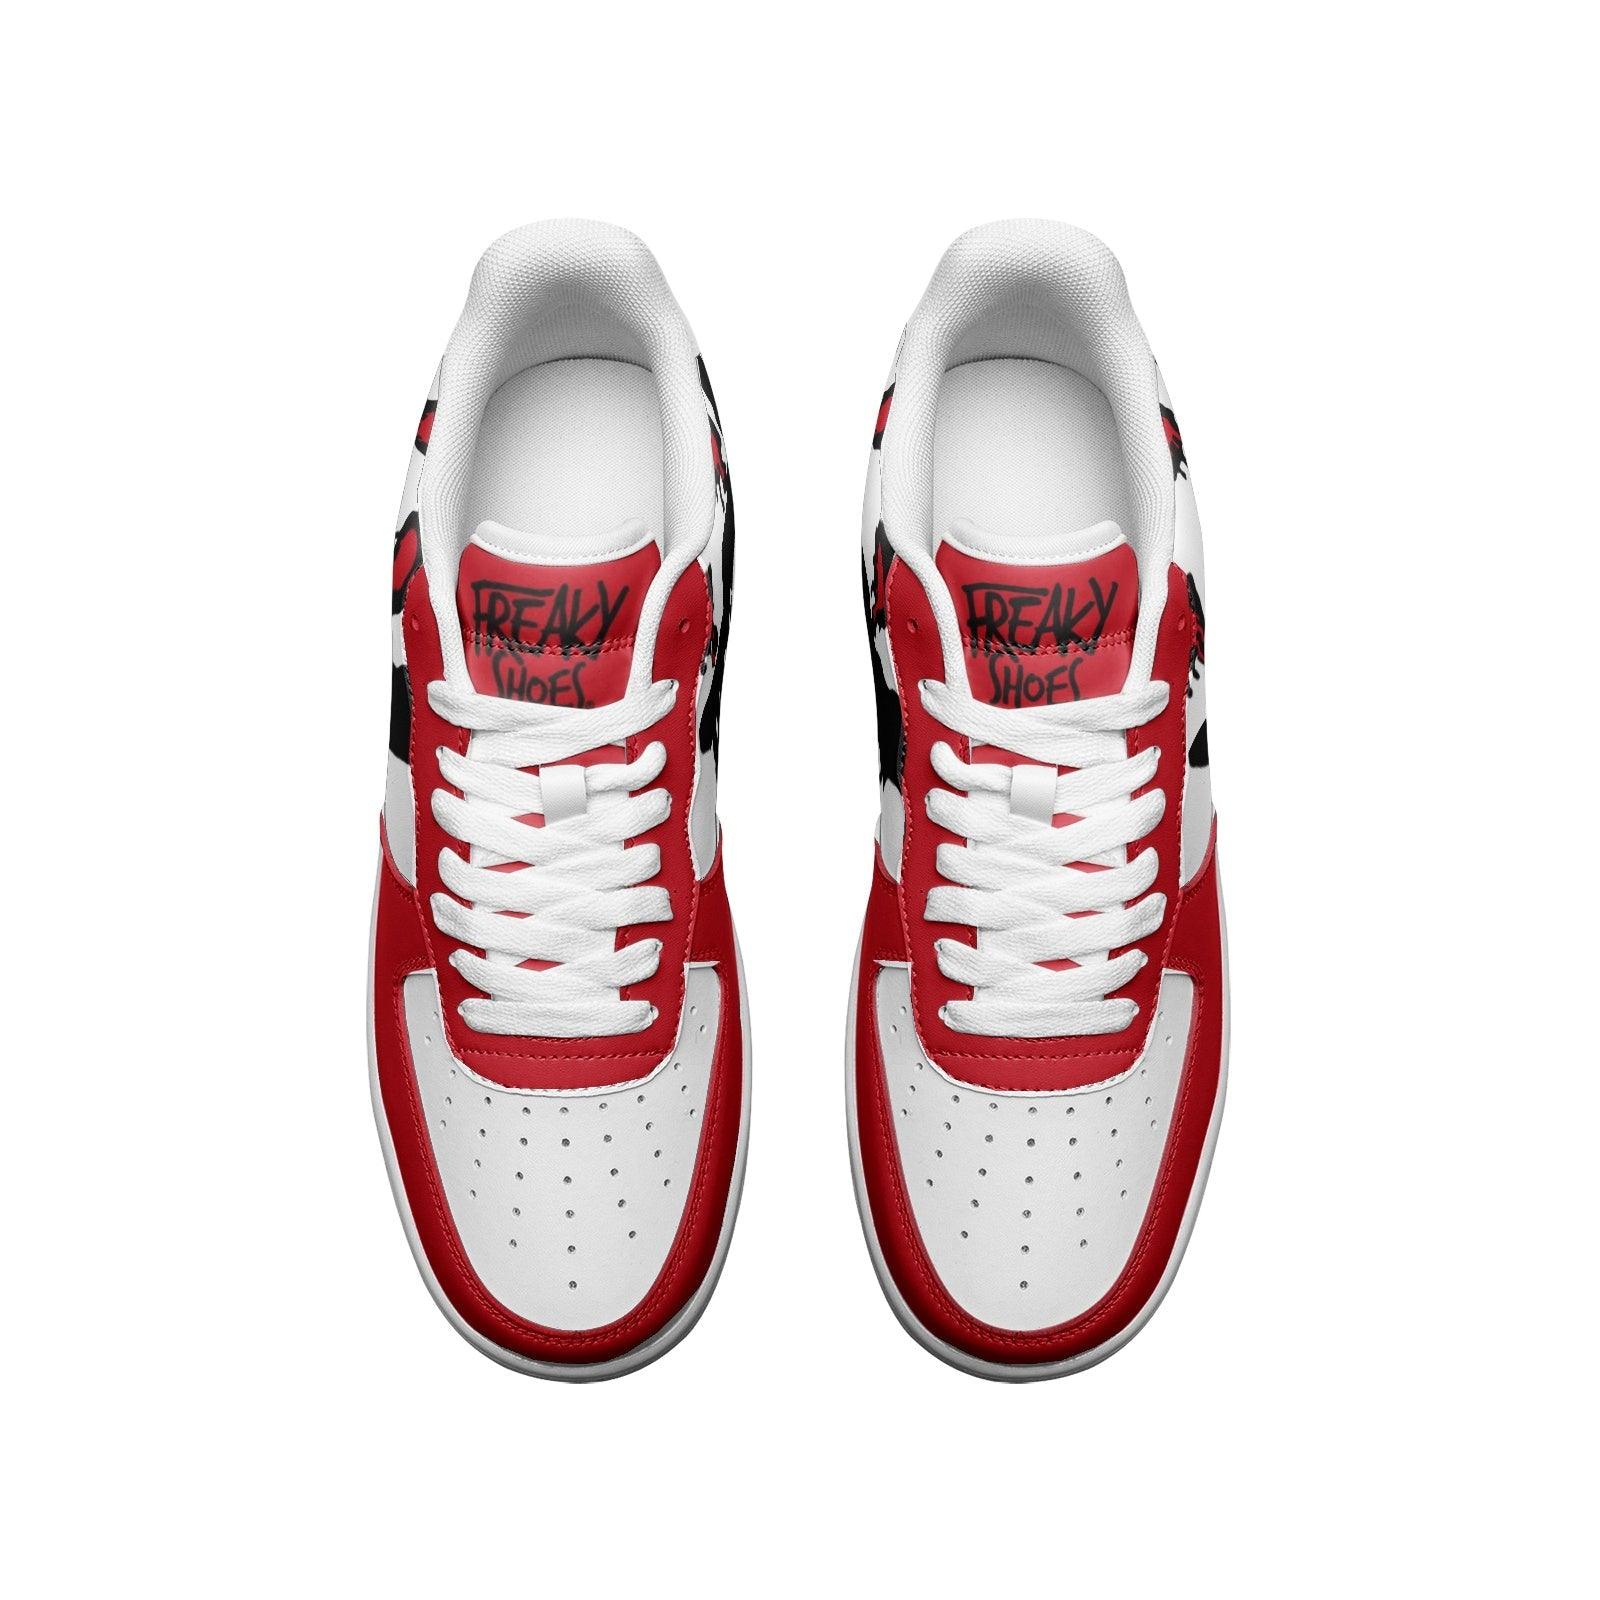 Freaky Shoes Branded Red White Low Tops - Shoes